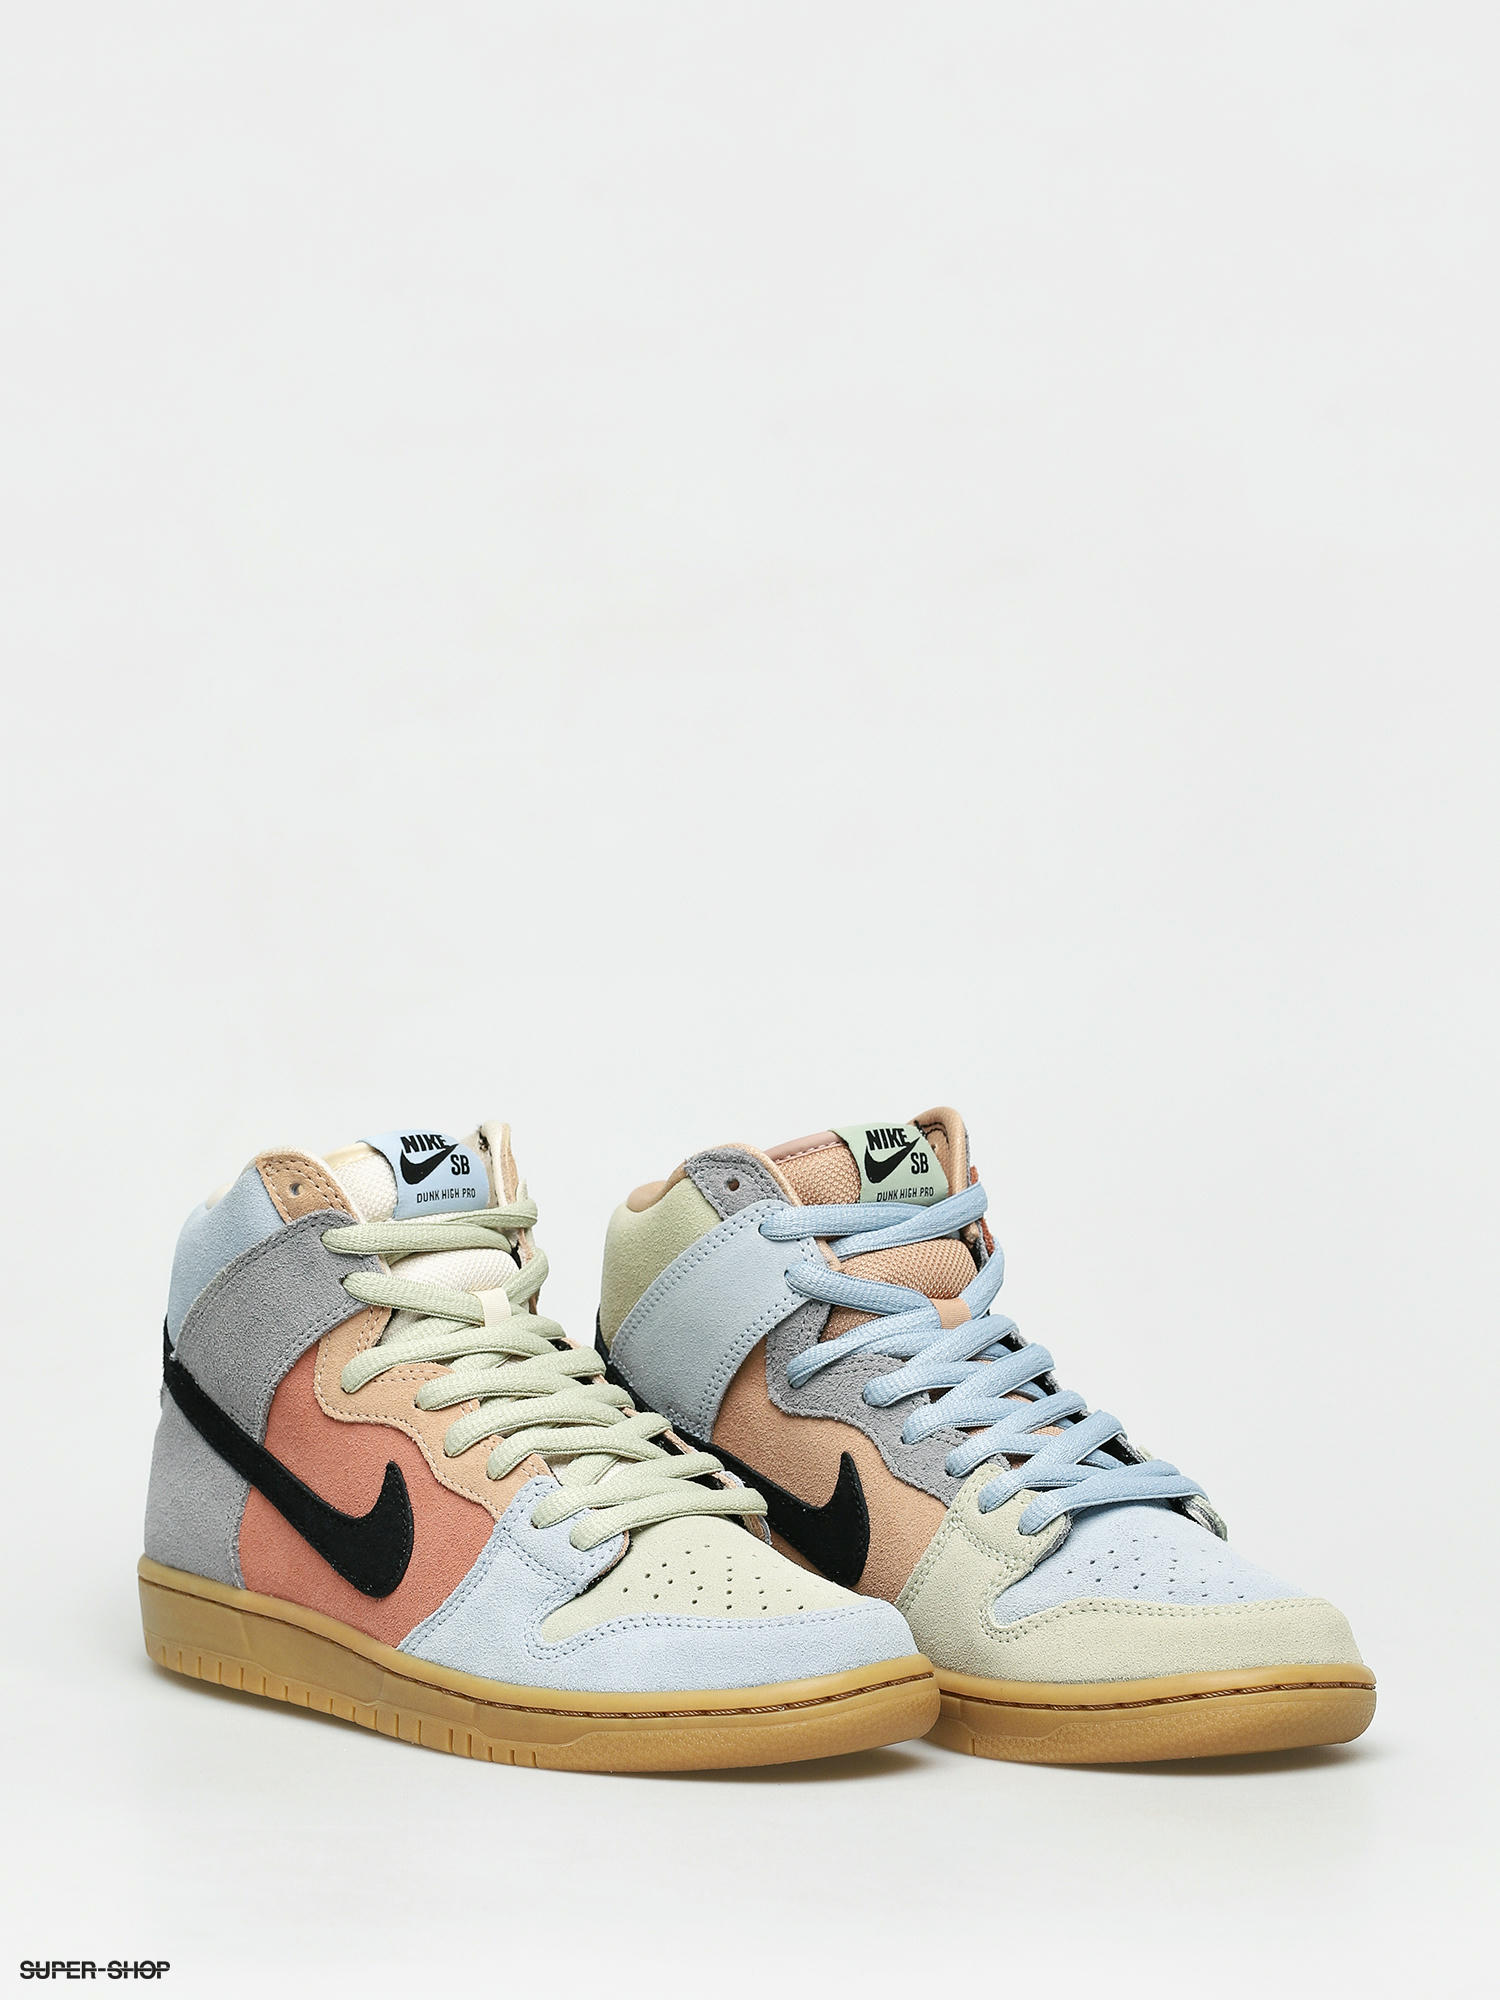 Nike SB Dunk High Pro Shoes (particle 